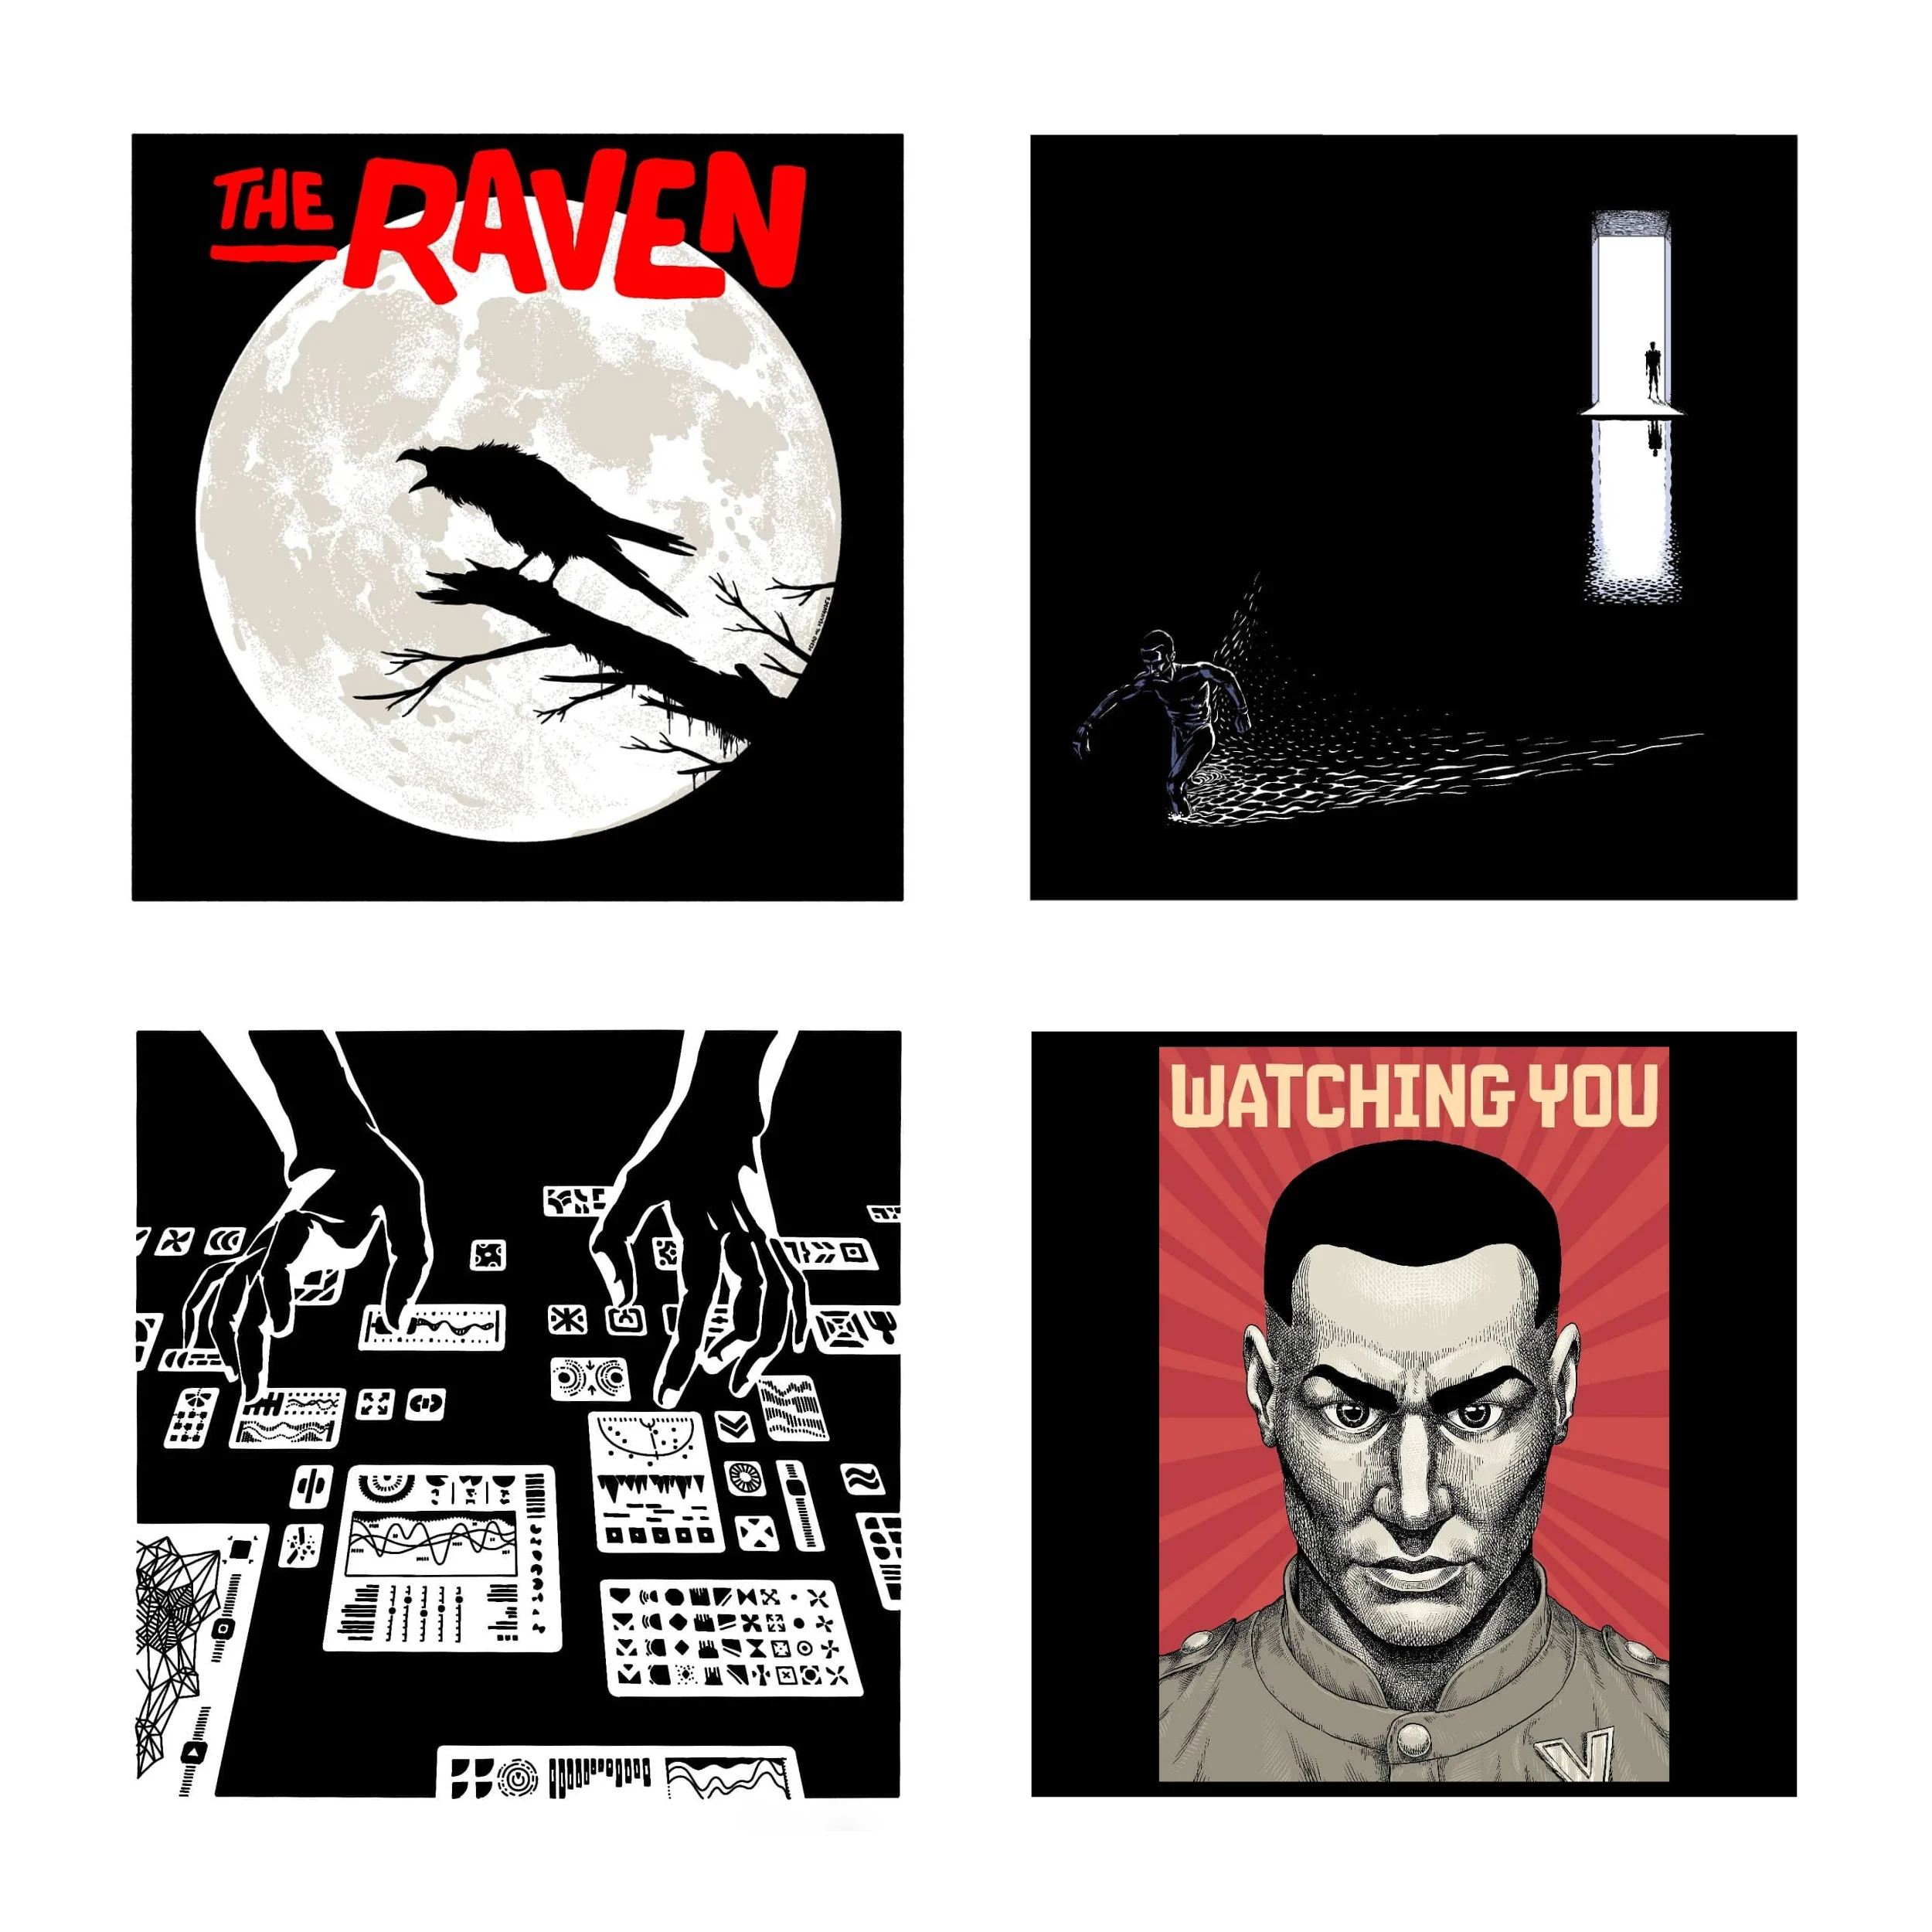 A selection of 4 illustrations that look like a book cover or movie poster: a raven before the moon; a man in escape on a dark room filled with water; a pair of hands manipulating a futuristic dashboard; and a portrait of an intimidating man with the title &#x27;Watching You.&#x27;